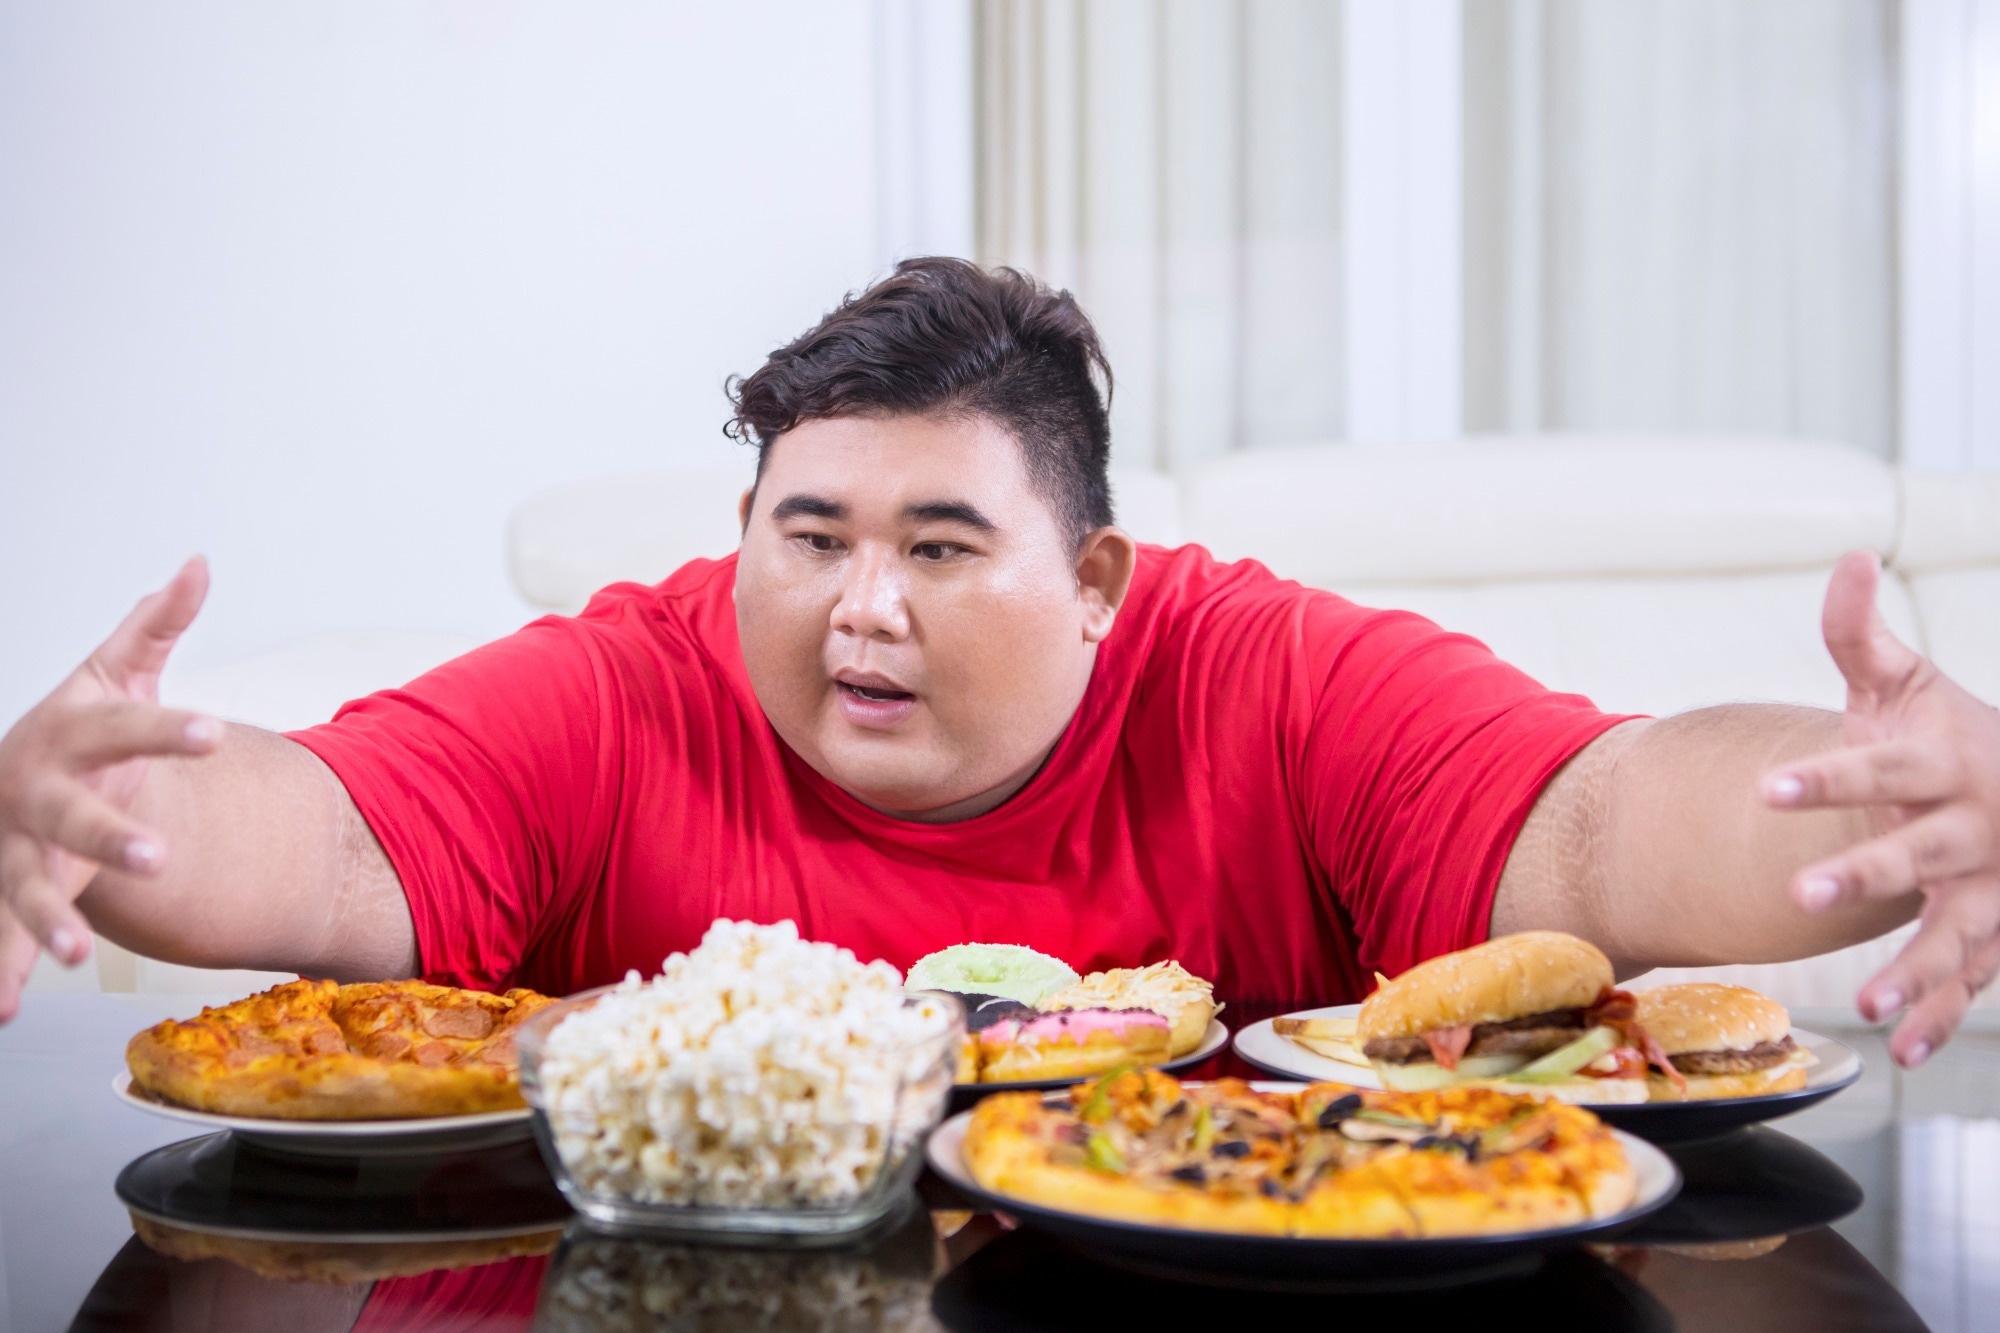 Study: GLP-1 receptor agonists: A novel pharmacotherapy for binge eating (Binge eating disorder and bulimia nervosa)? A systematic review. Image Credit: Creativa Images / Shutterstock